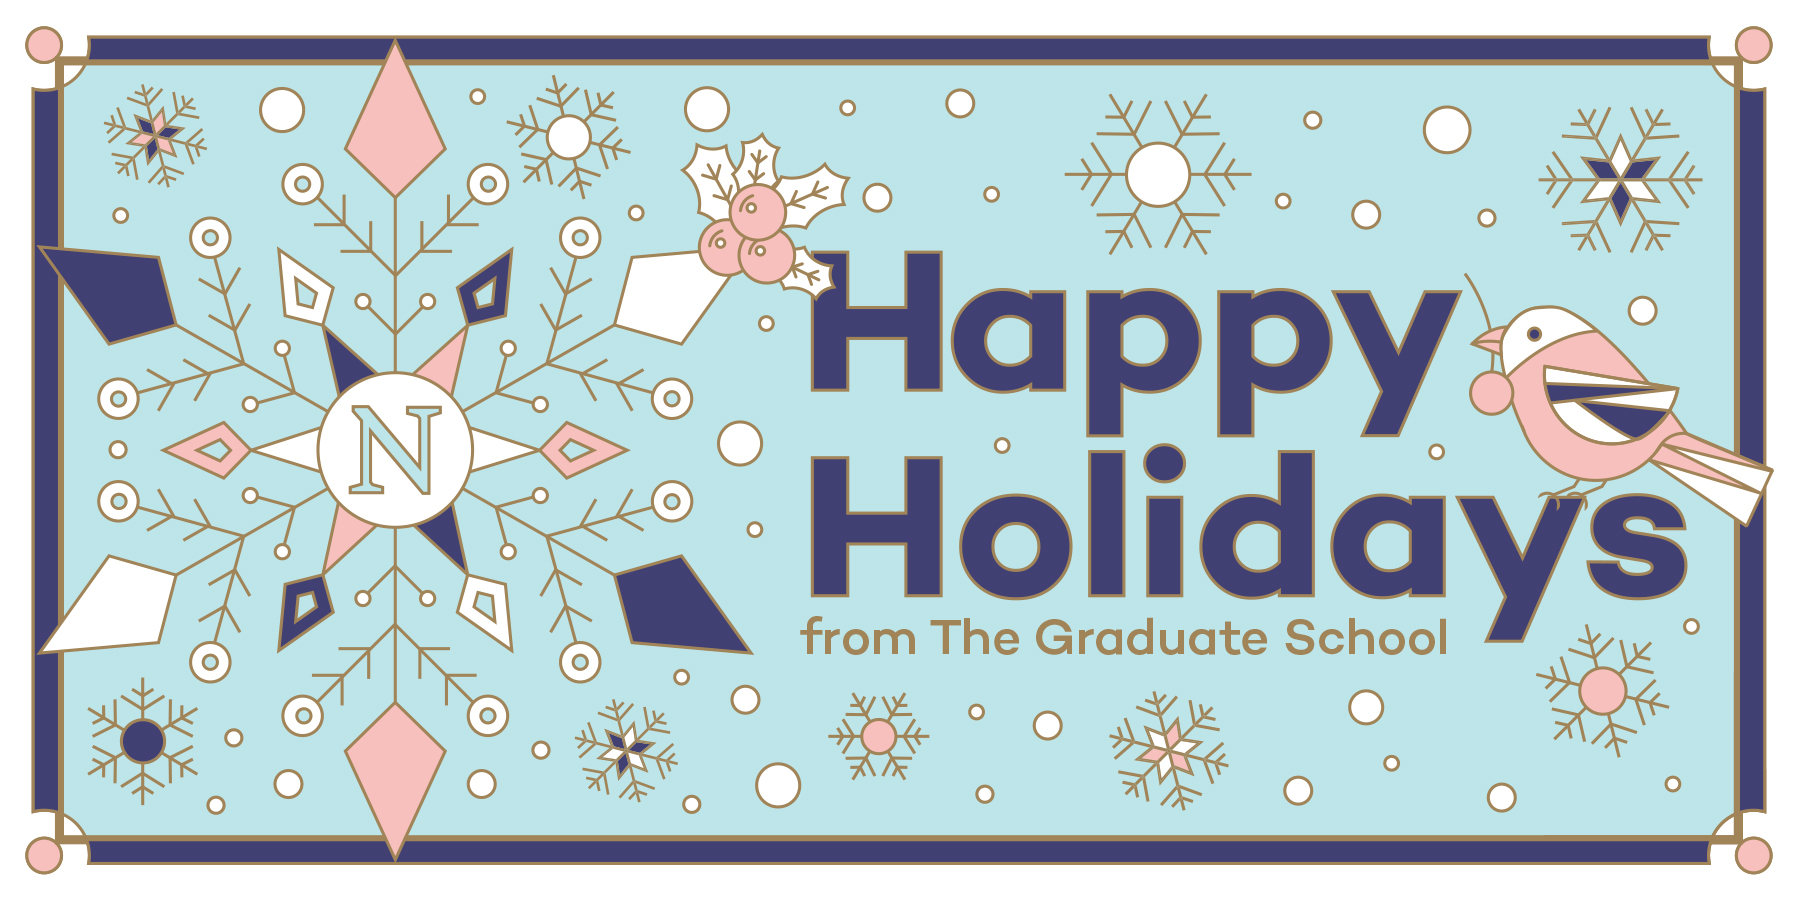 Graphic with snowflakes that says "Happy Holidays from The Graduate School"